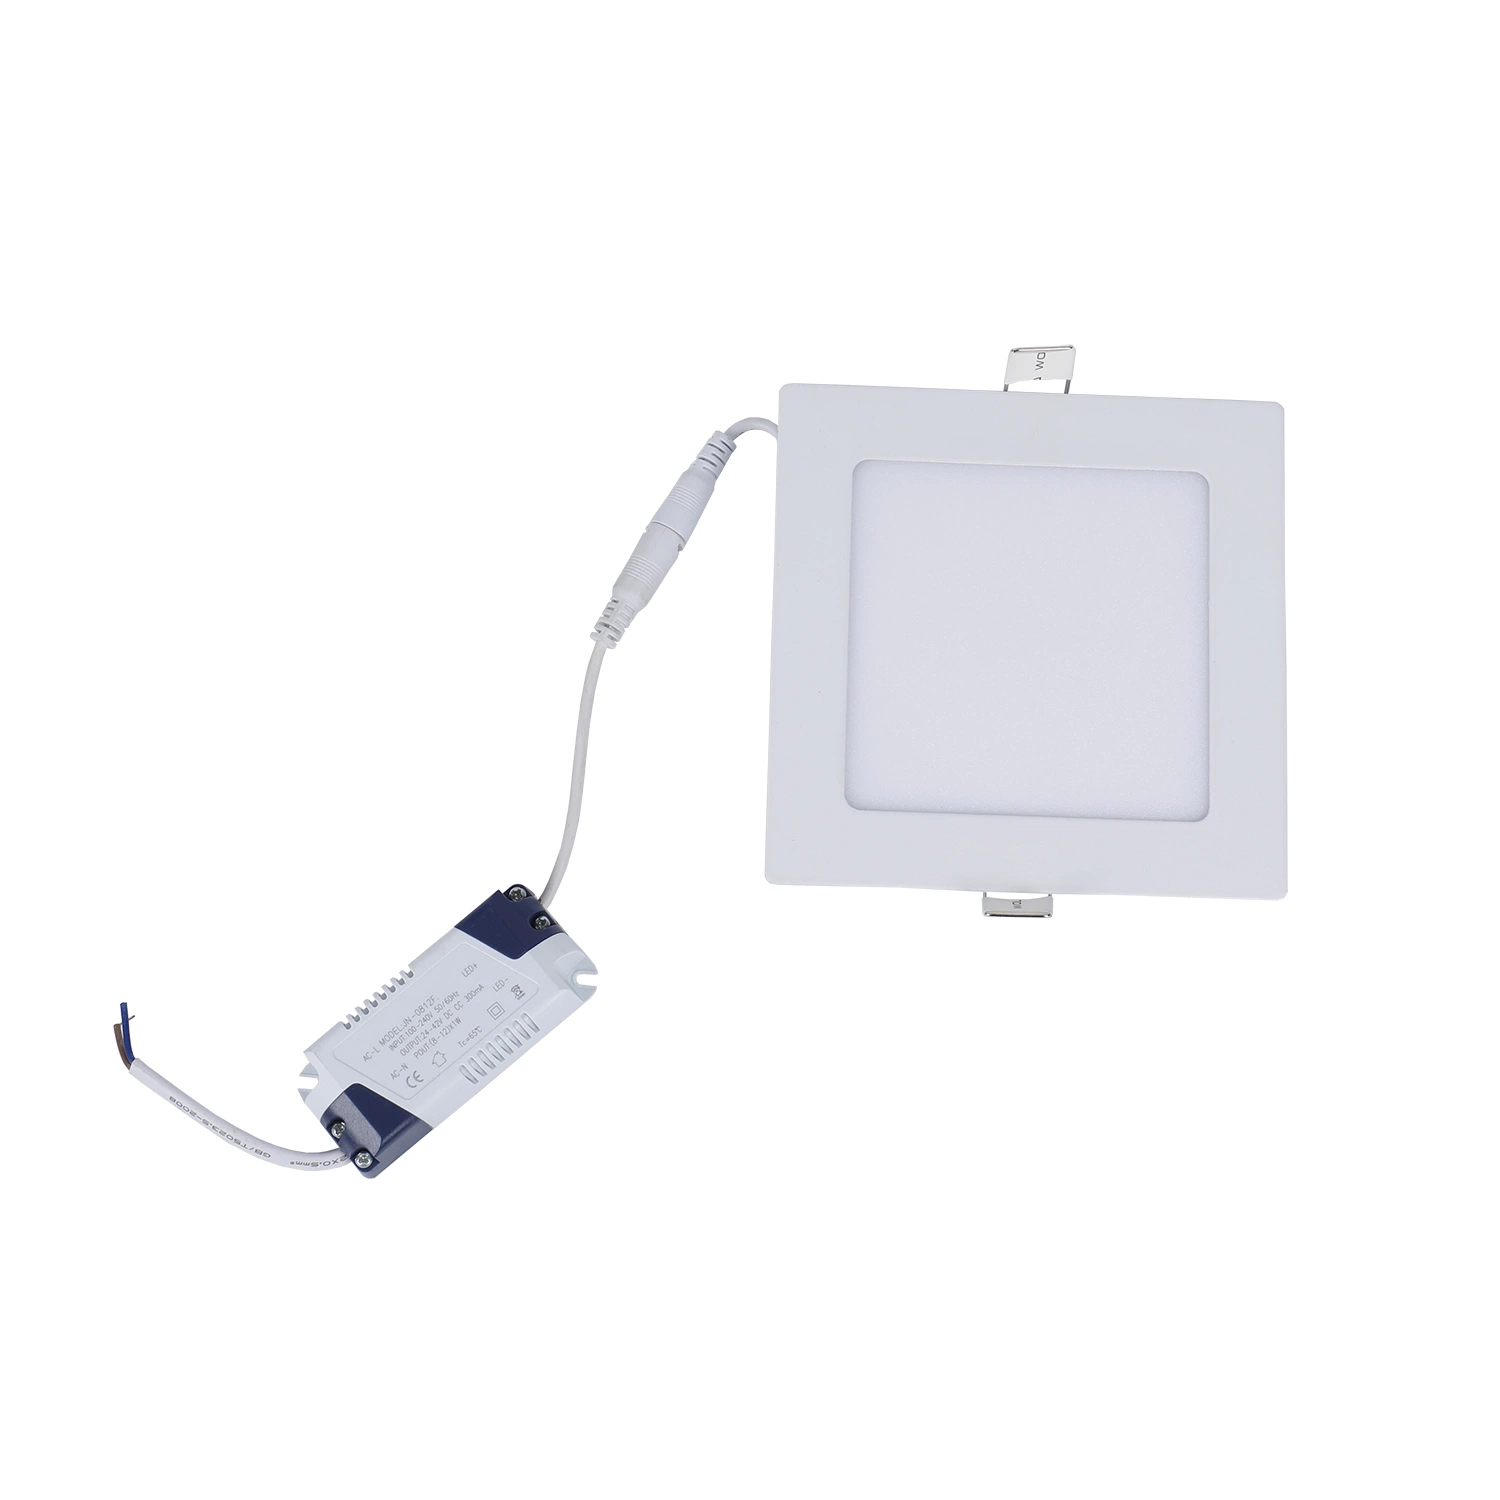 9W Square Small LED Ceiling Panel Light